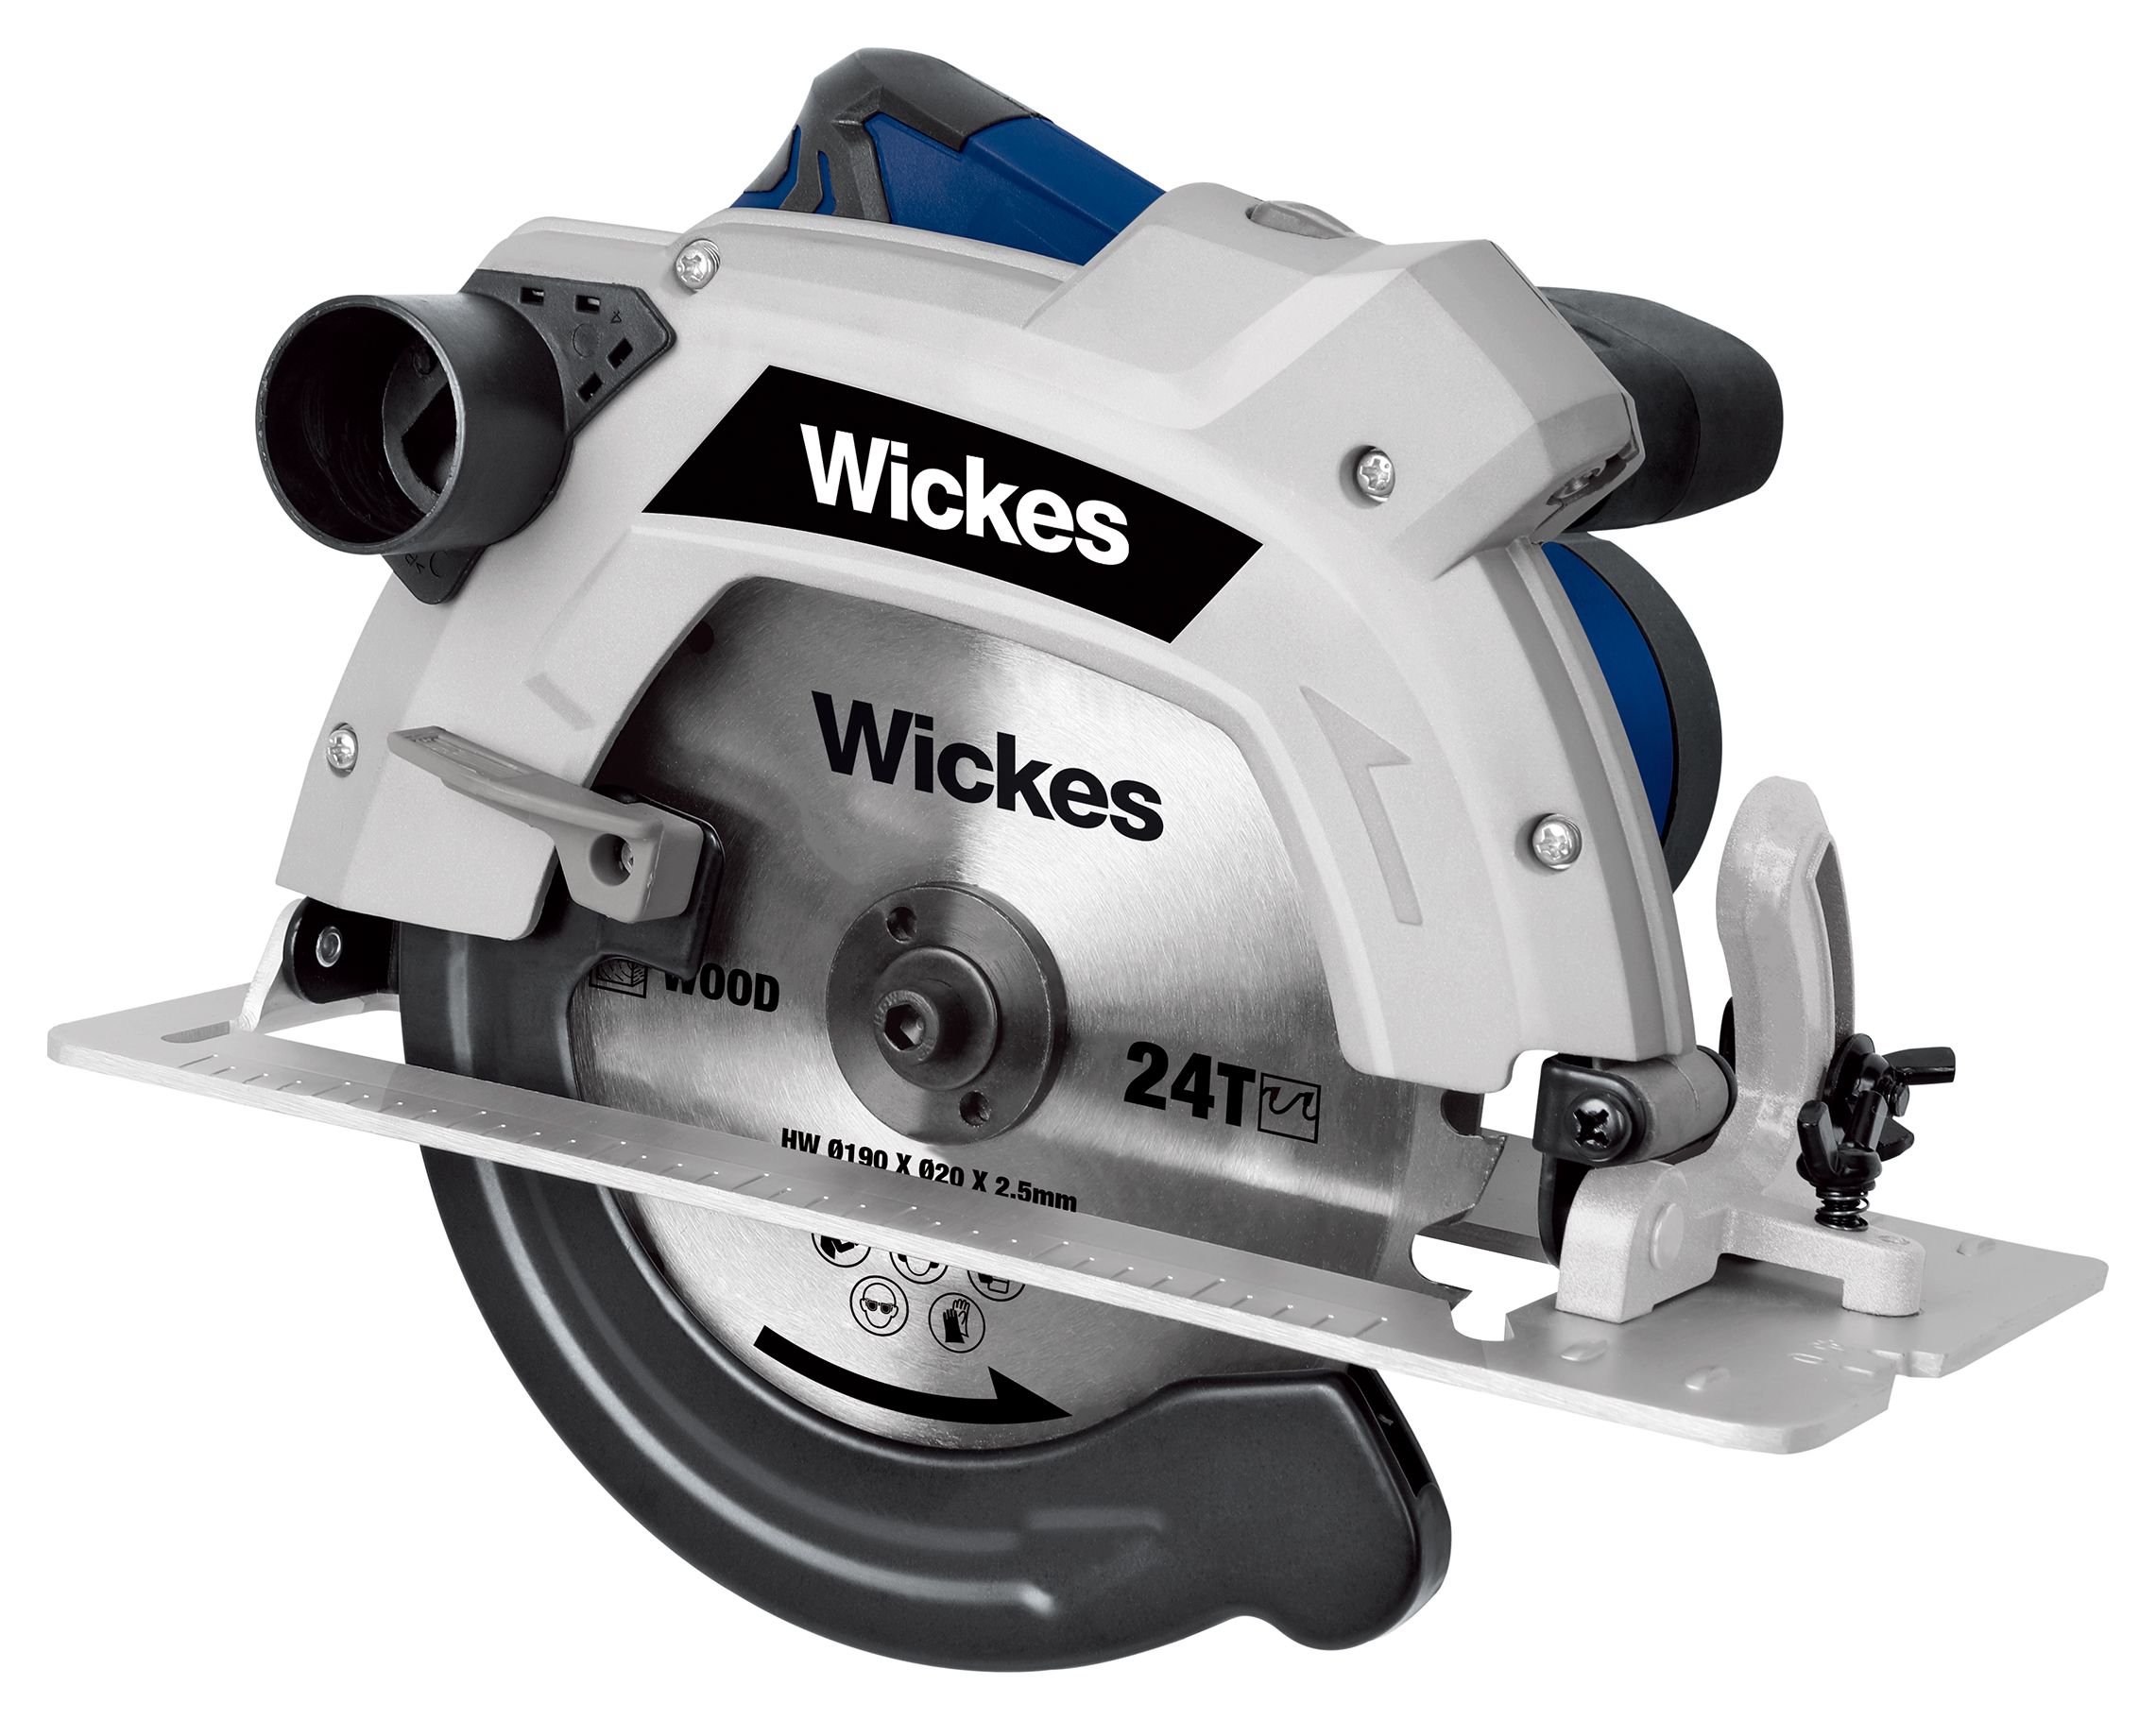 Wickes 190mm Corded Circular Saw with Laser Guide - 1400W